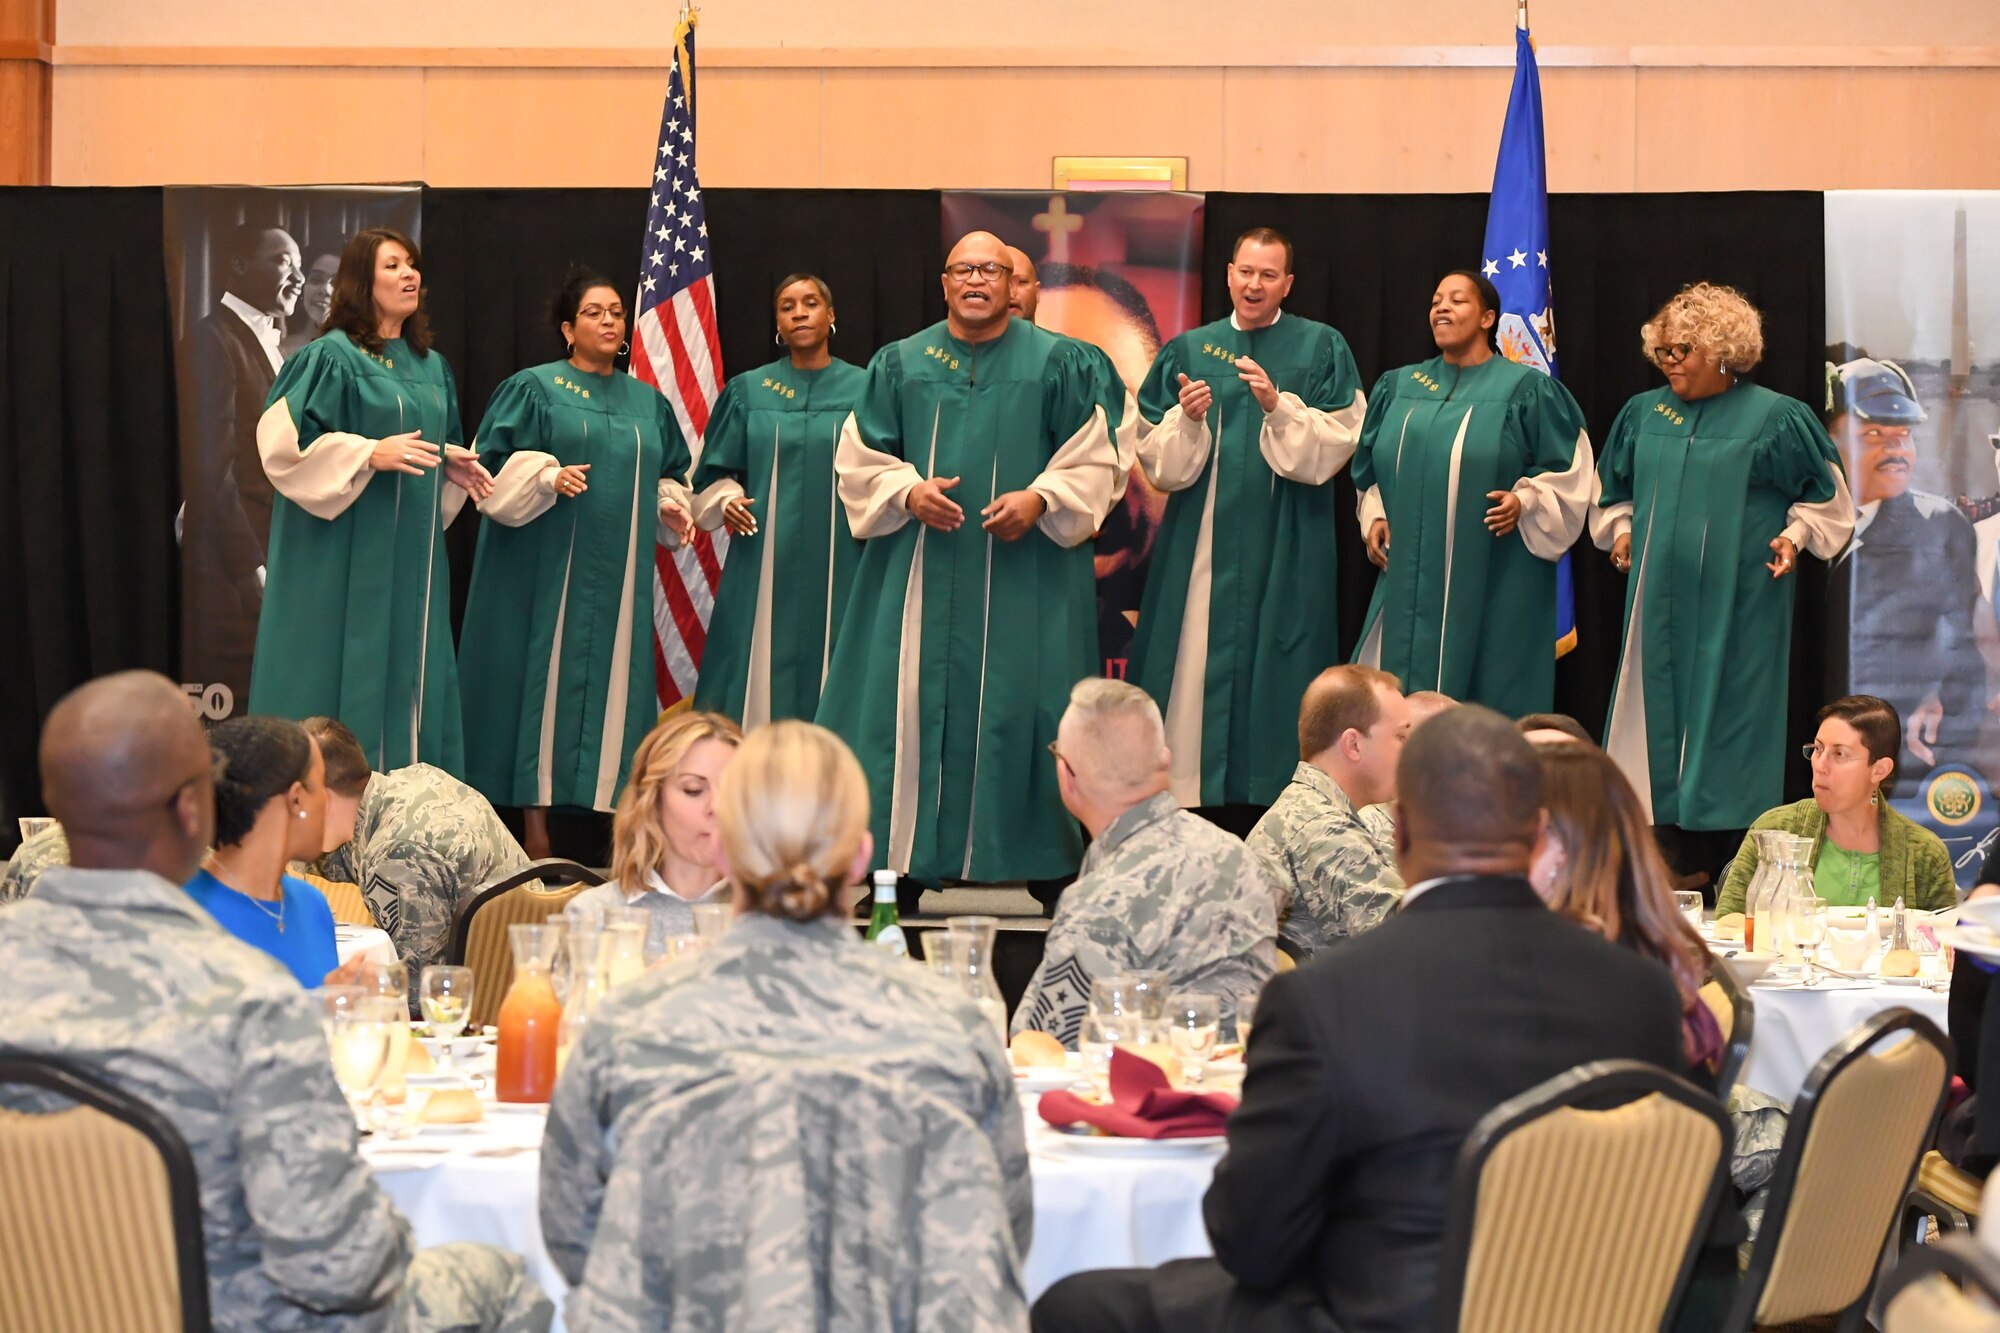 The Hill Air Force Base Inspirational Gospel Choir performs at the Martin Luther King, Jr. Commemoration Luncheon held Jan. 17, 2018, at Hill AFB, Utah. (U.S. Air Force photo by Cynthia Griggs)